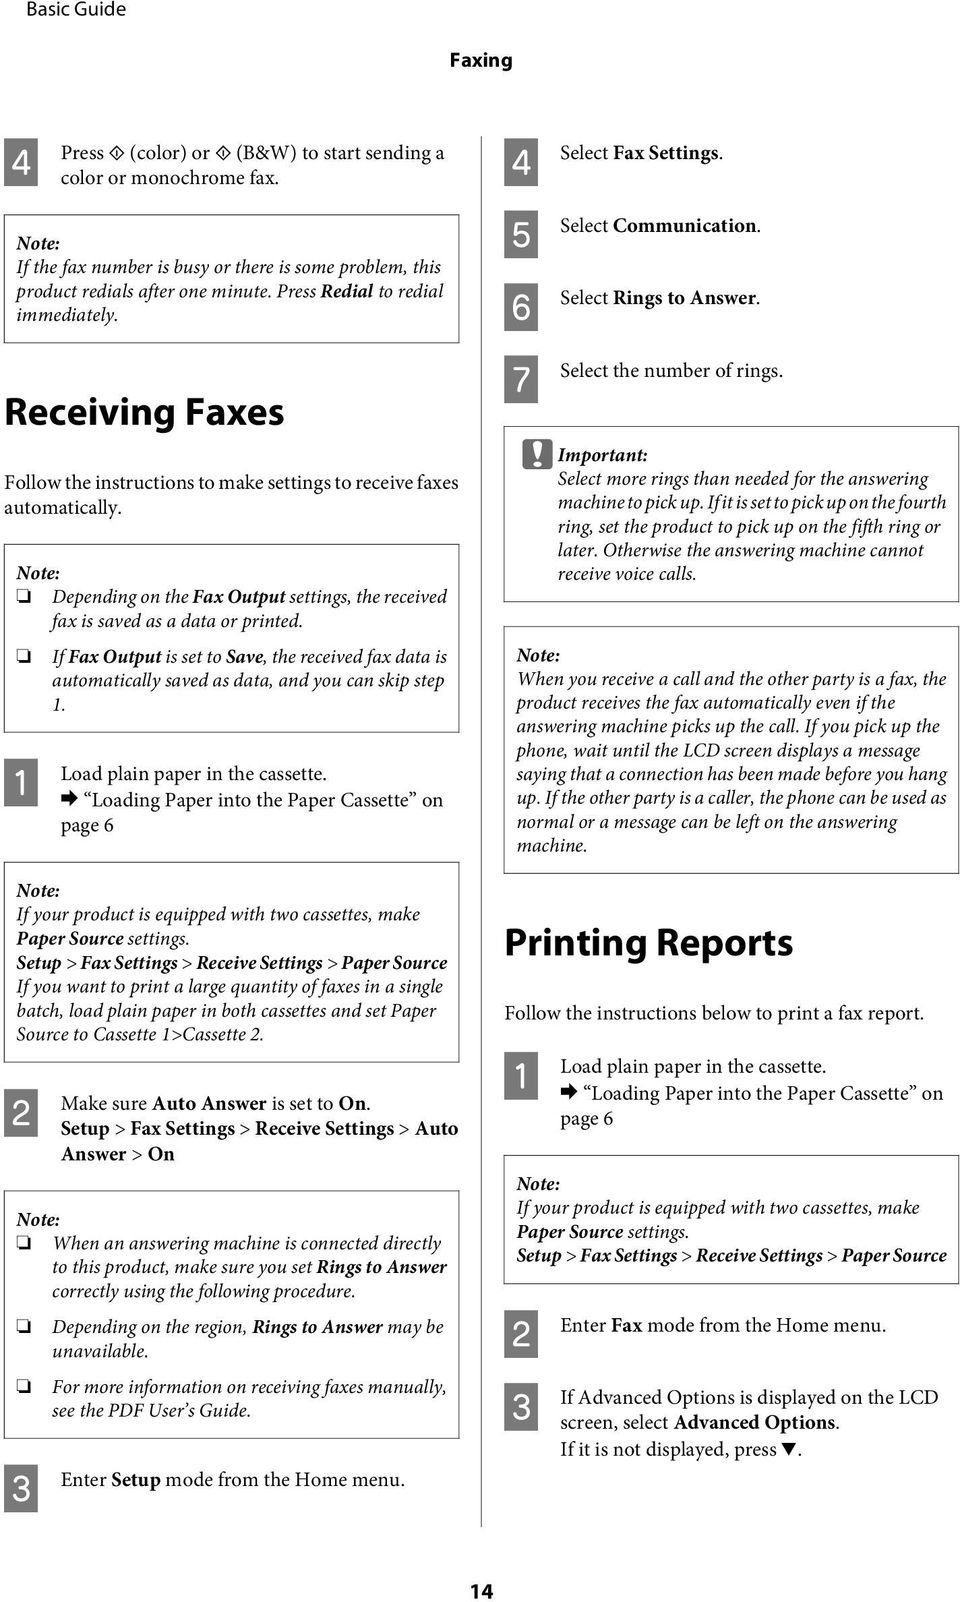 Note: epending on the Fax Output settings, the received fax is saved as a data or printed. If Fax Output is set to Save, the received fax data is automatically saved as data, and you can skip step 1.